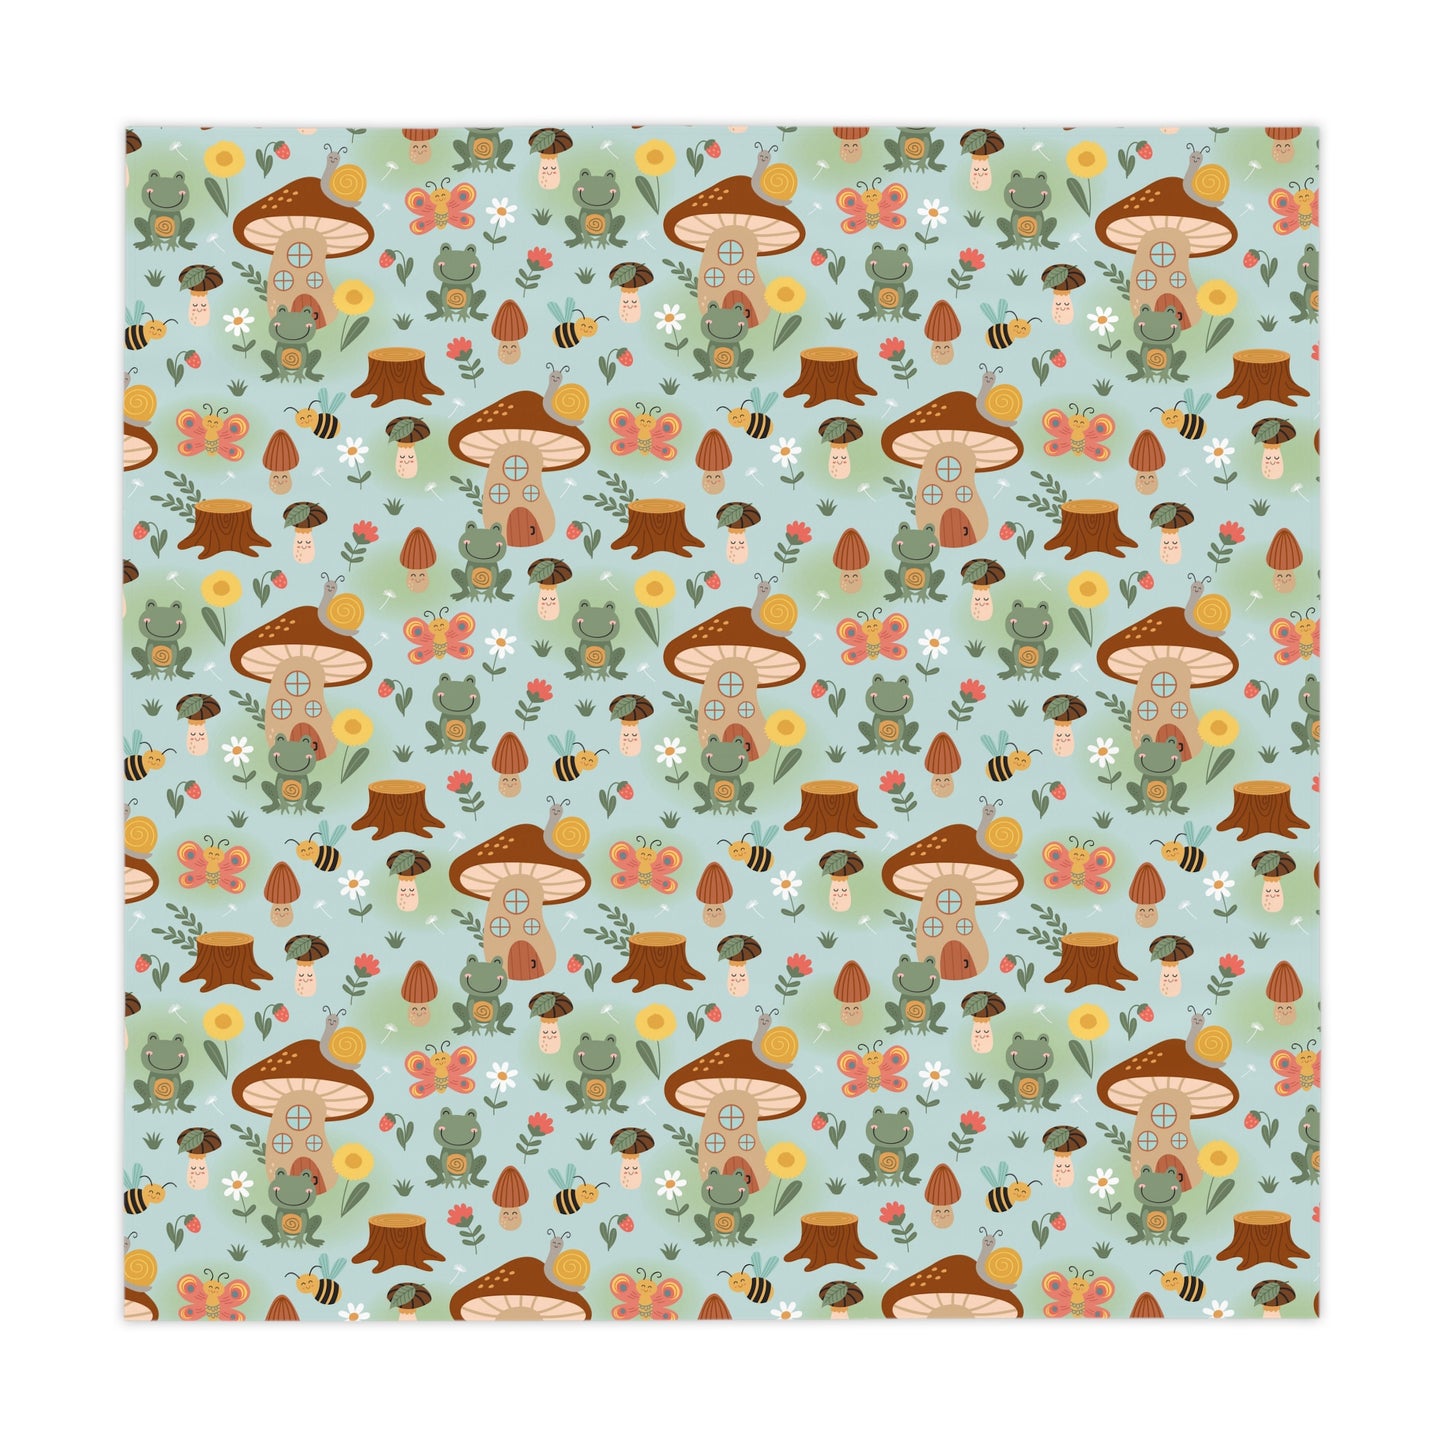 Frogs and Mushrooms Tablecloth